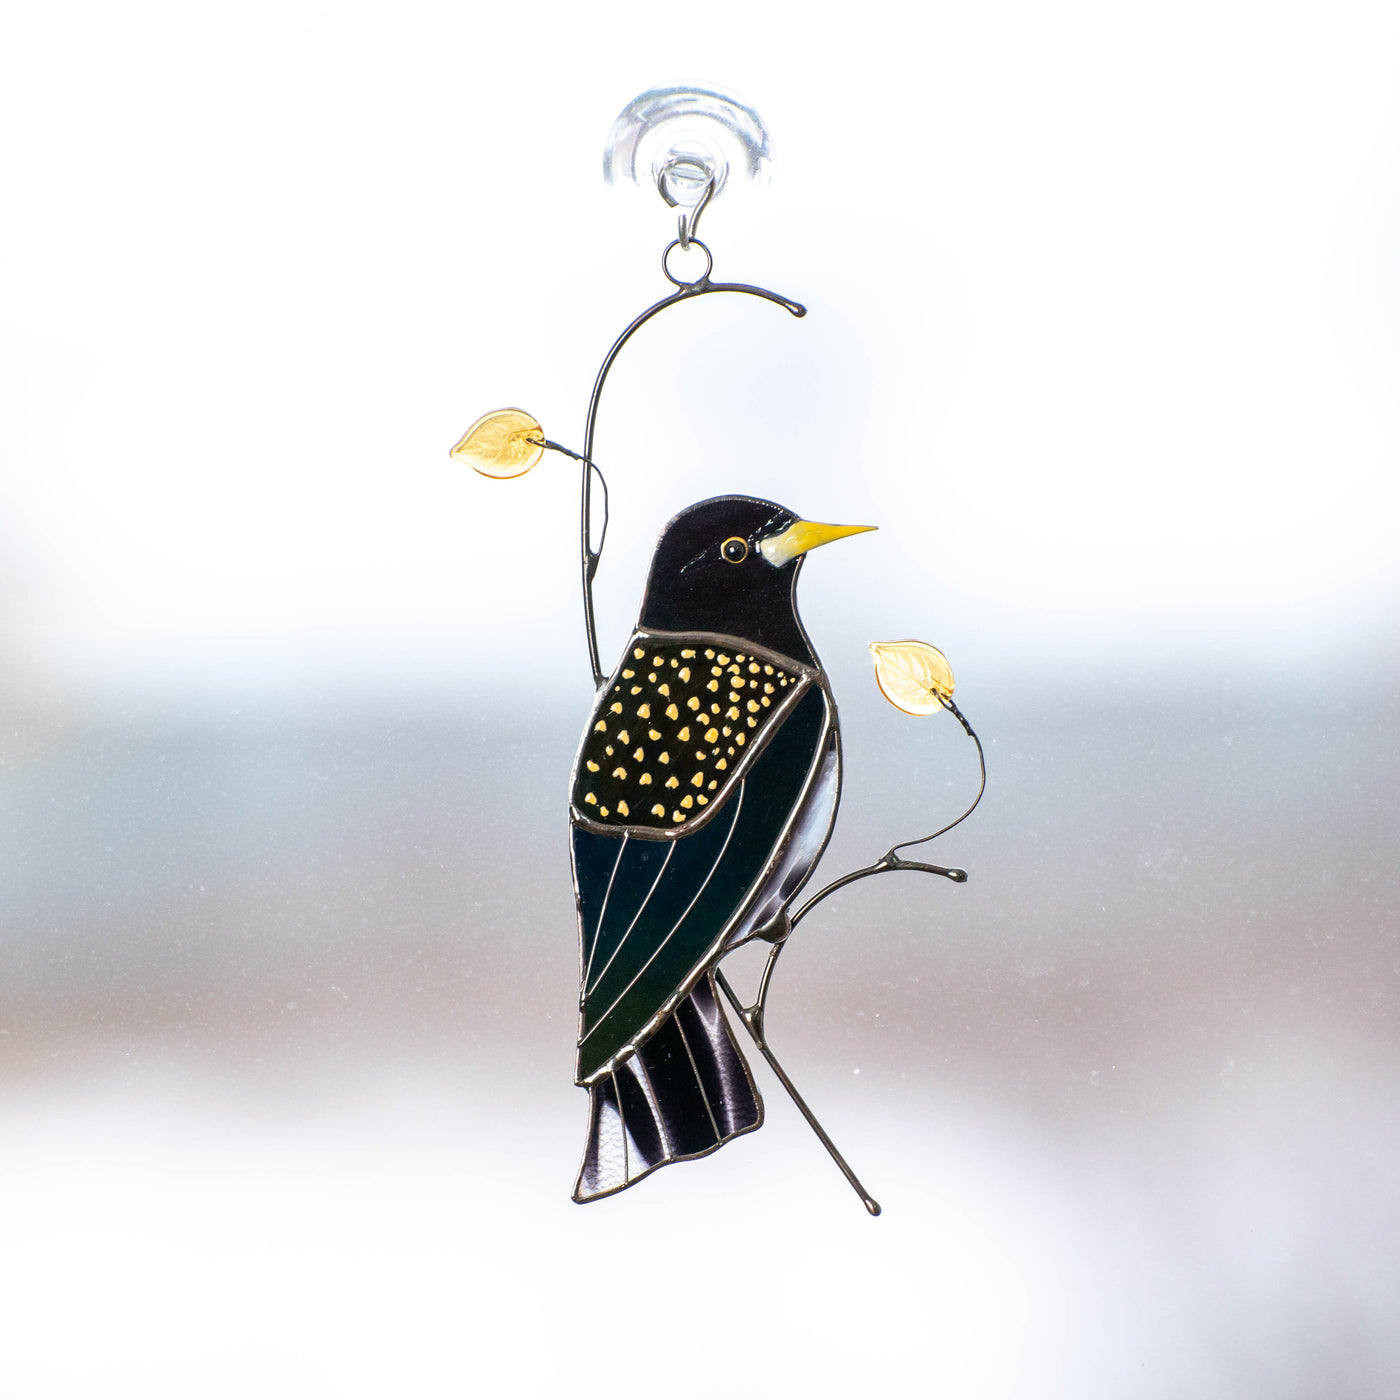 Stained glass European starling bird with iridescent parts suncatcher